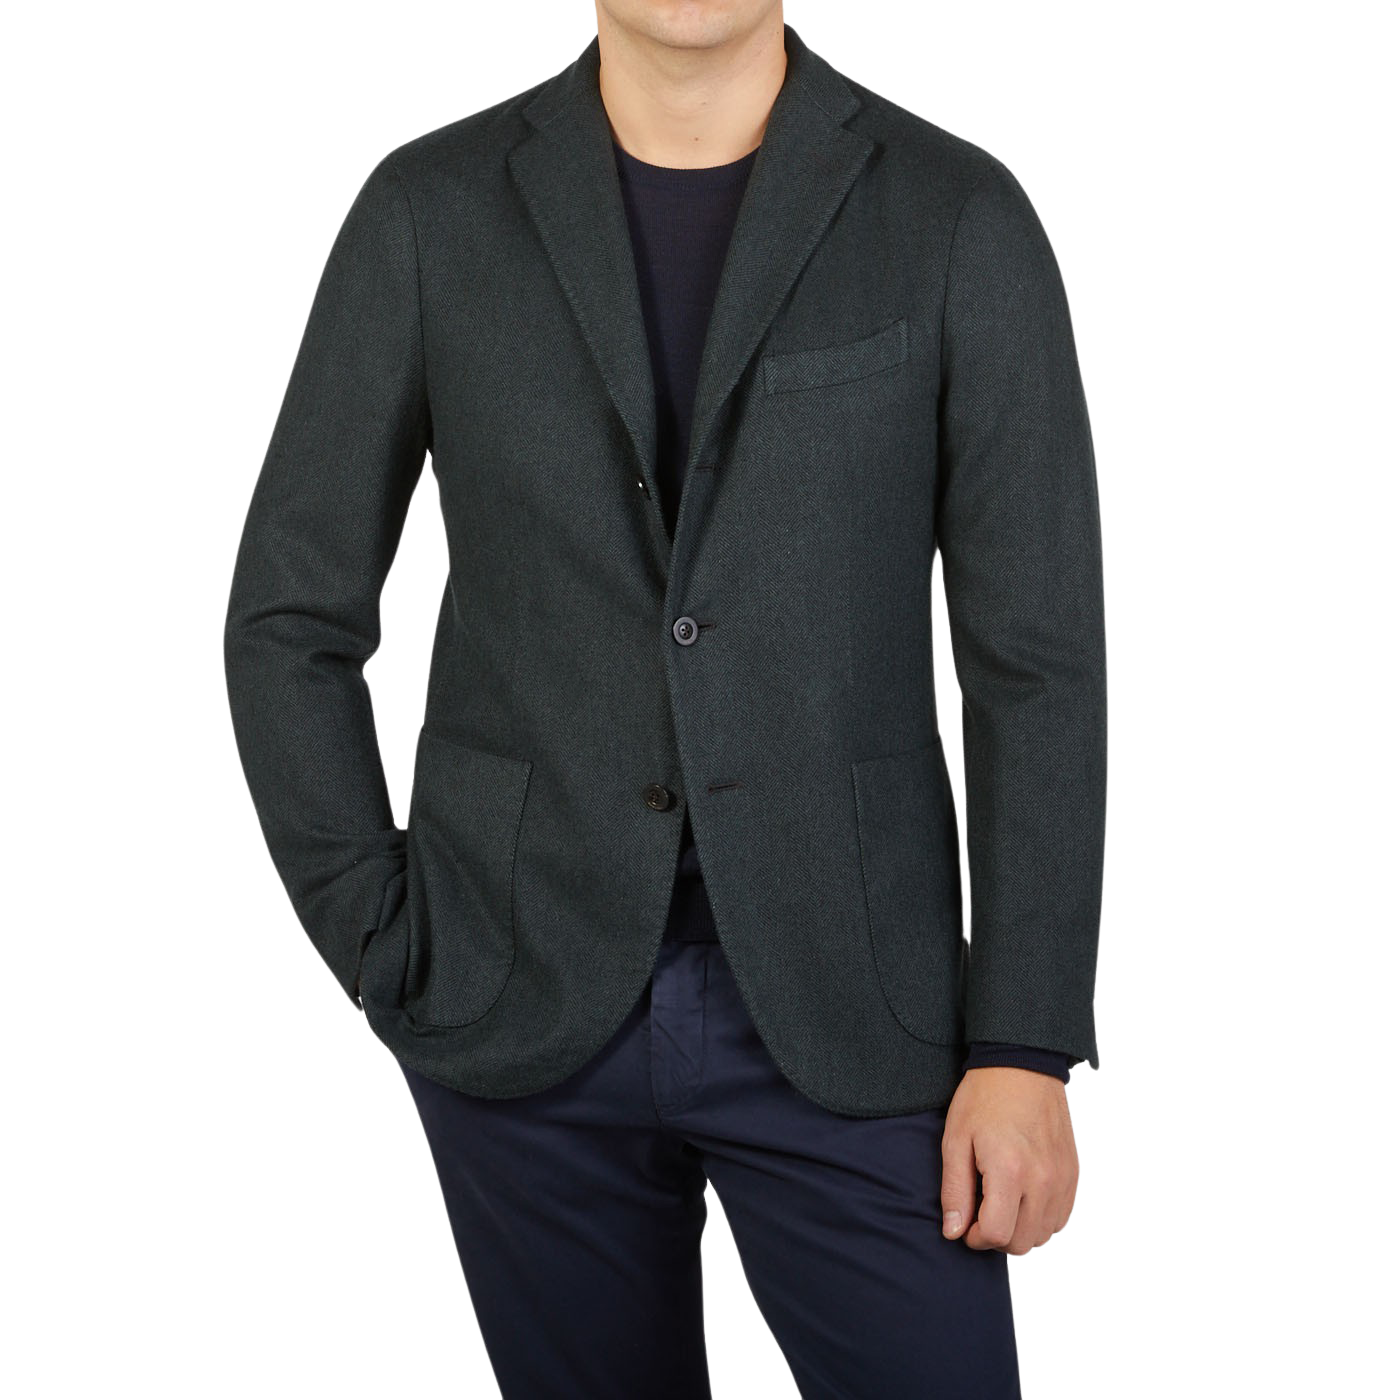 An unstructured Boglioli Green Herringbone Wool K Jacket made in Italy, worn by a man sporting a green blazer and black pants.